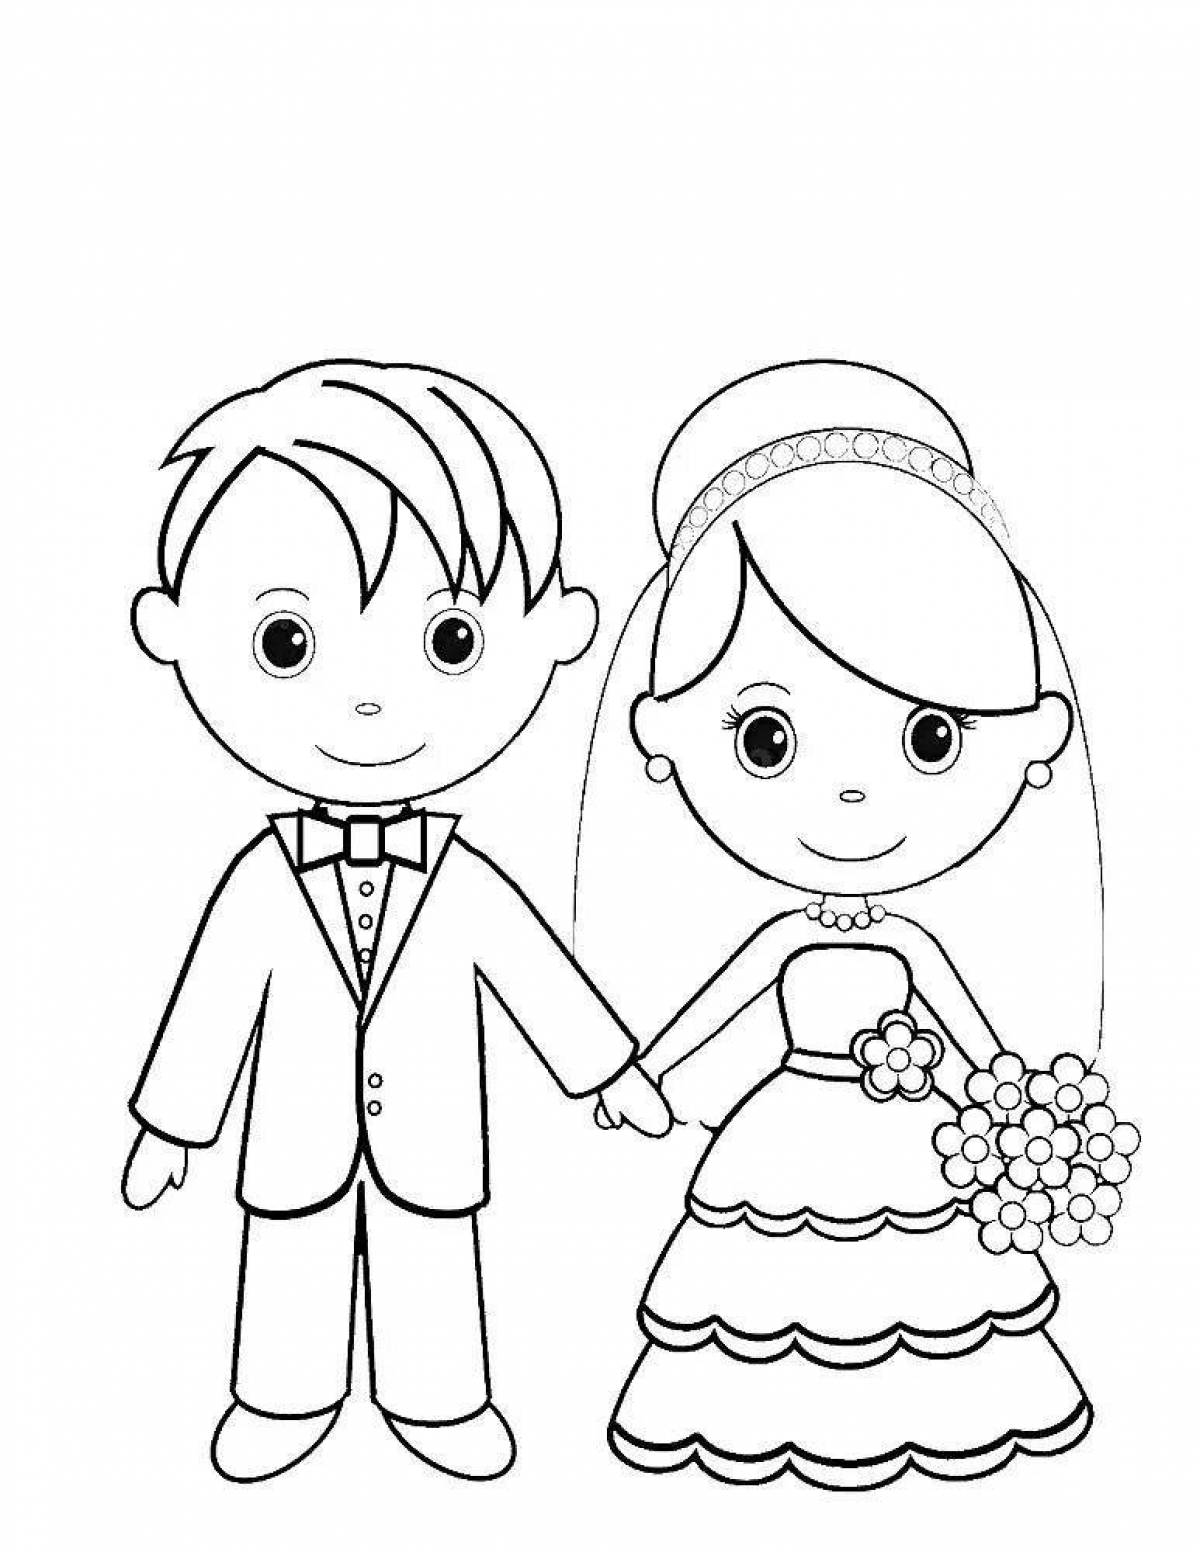 Majestic bride and groom coloring page